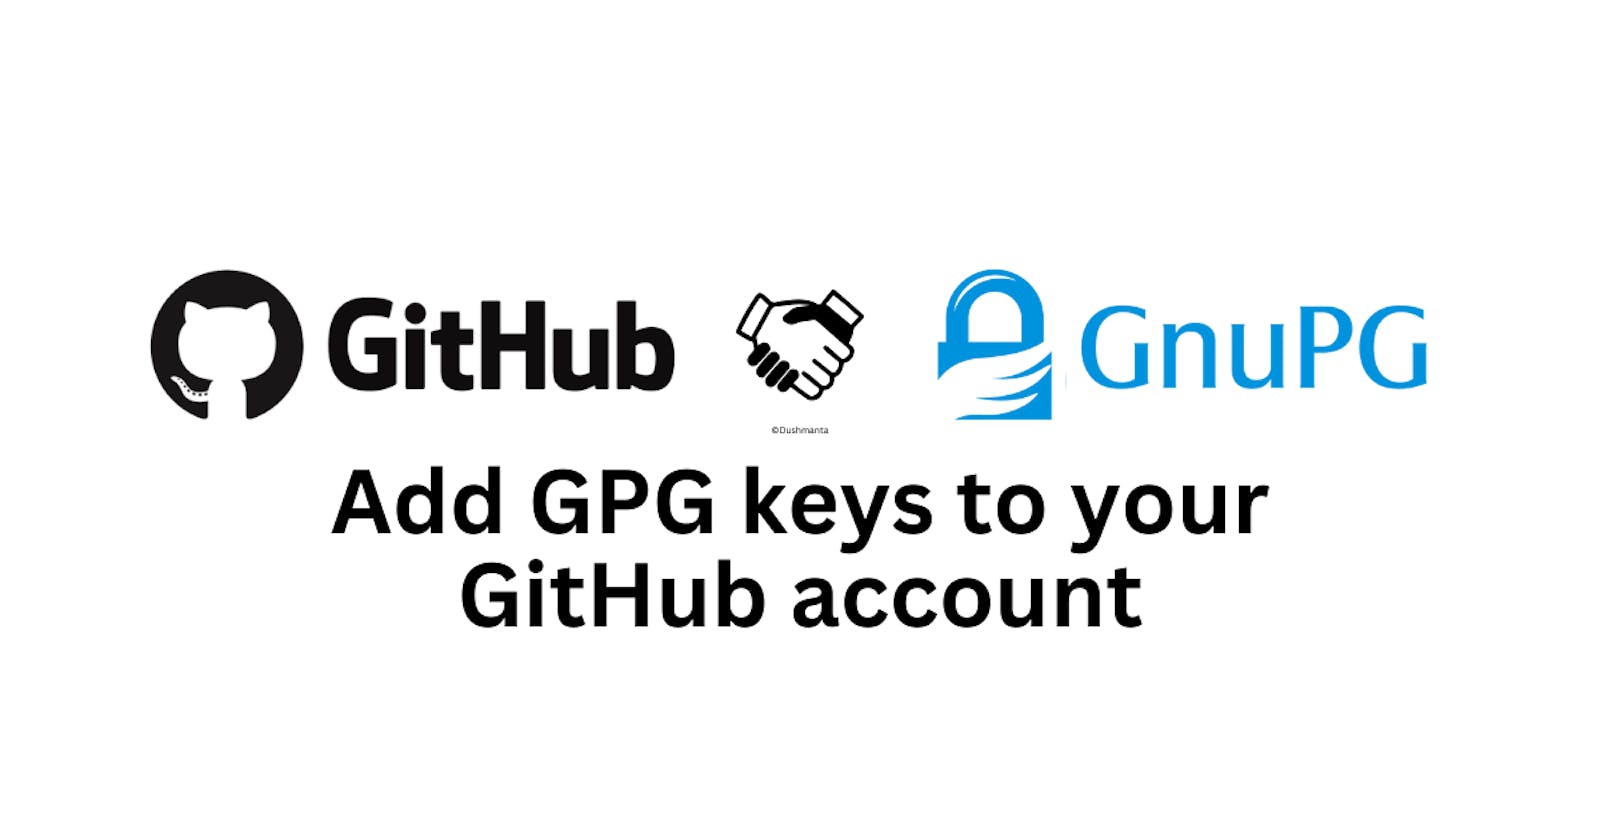 Generating and Adding GPG Keys to Your GitHub Account